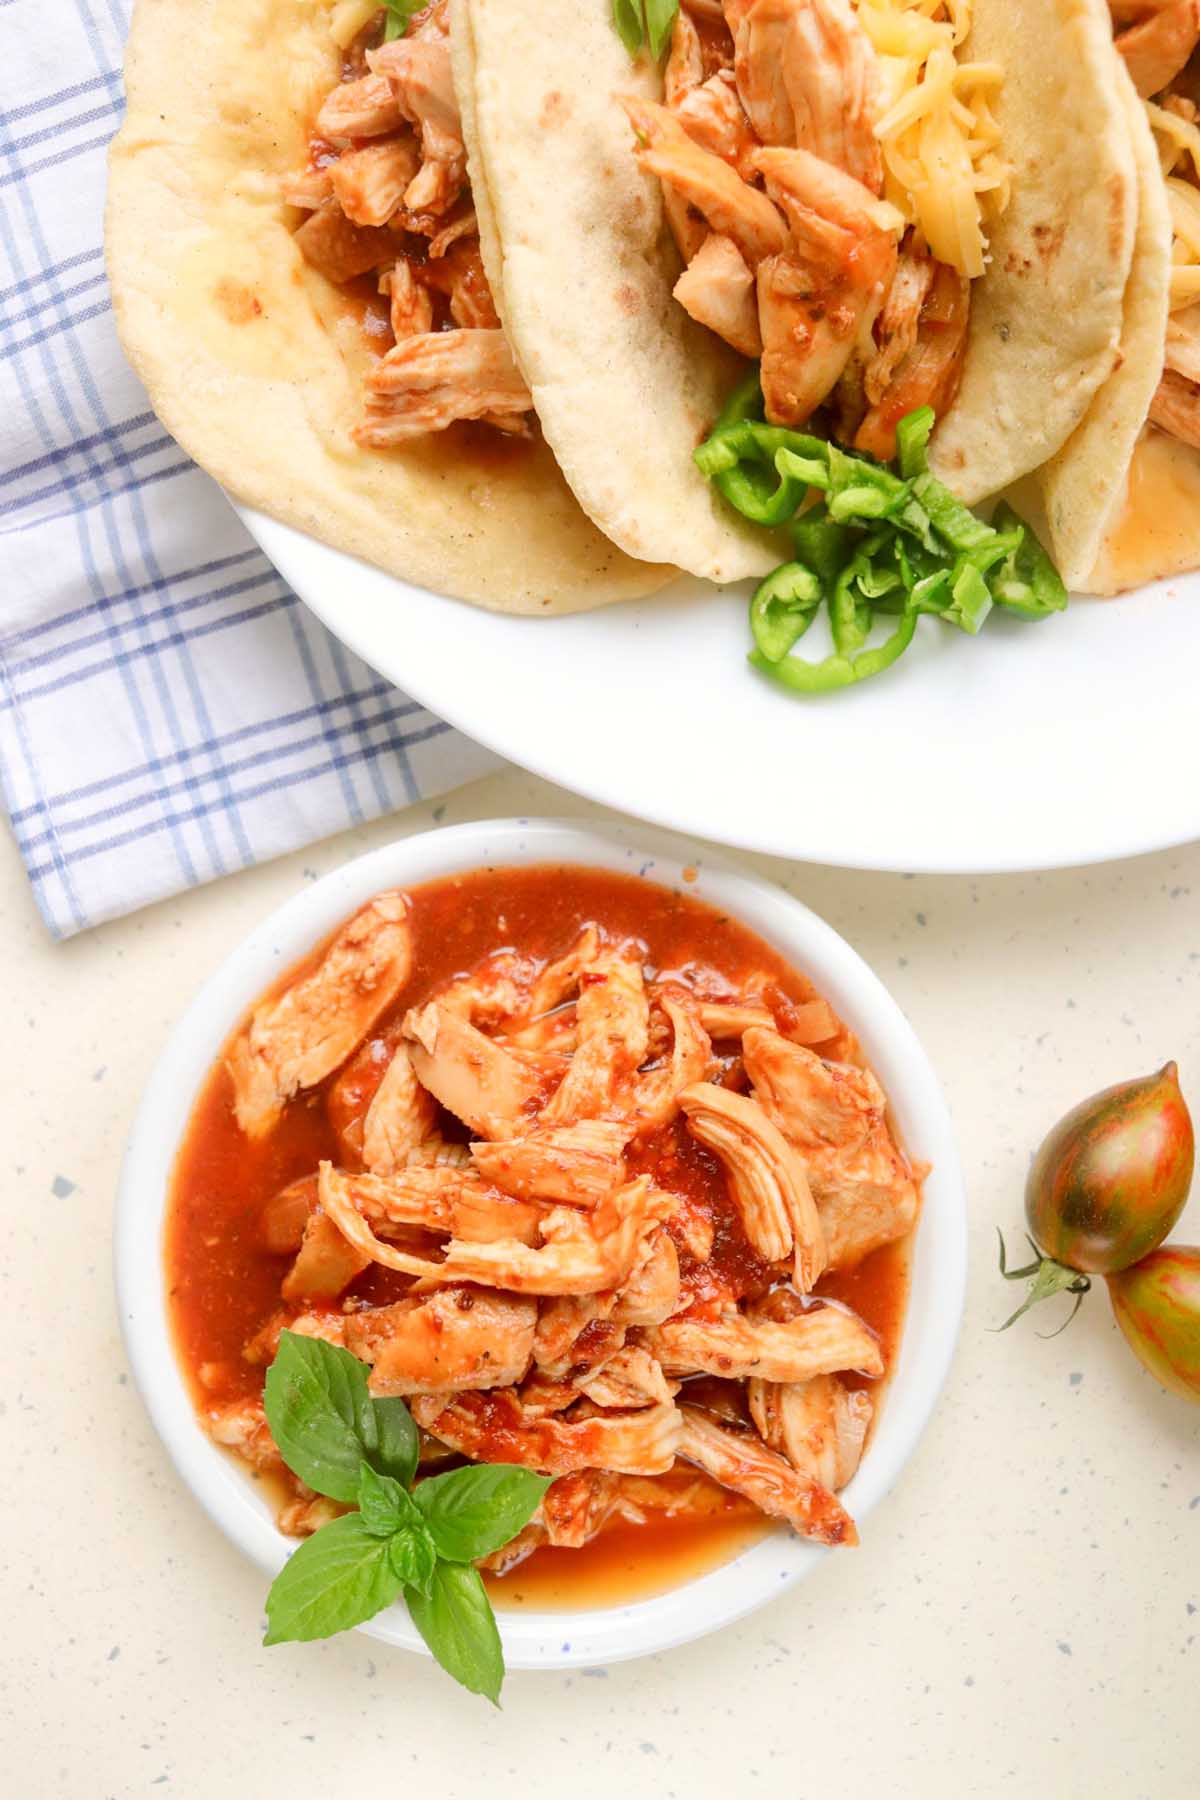 Chicken tacos on a plate next to a bowl of pulled chicken.